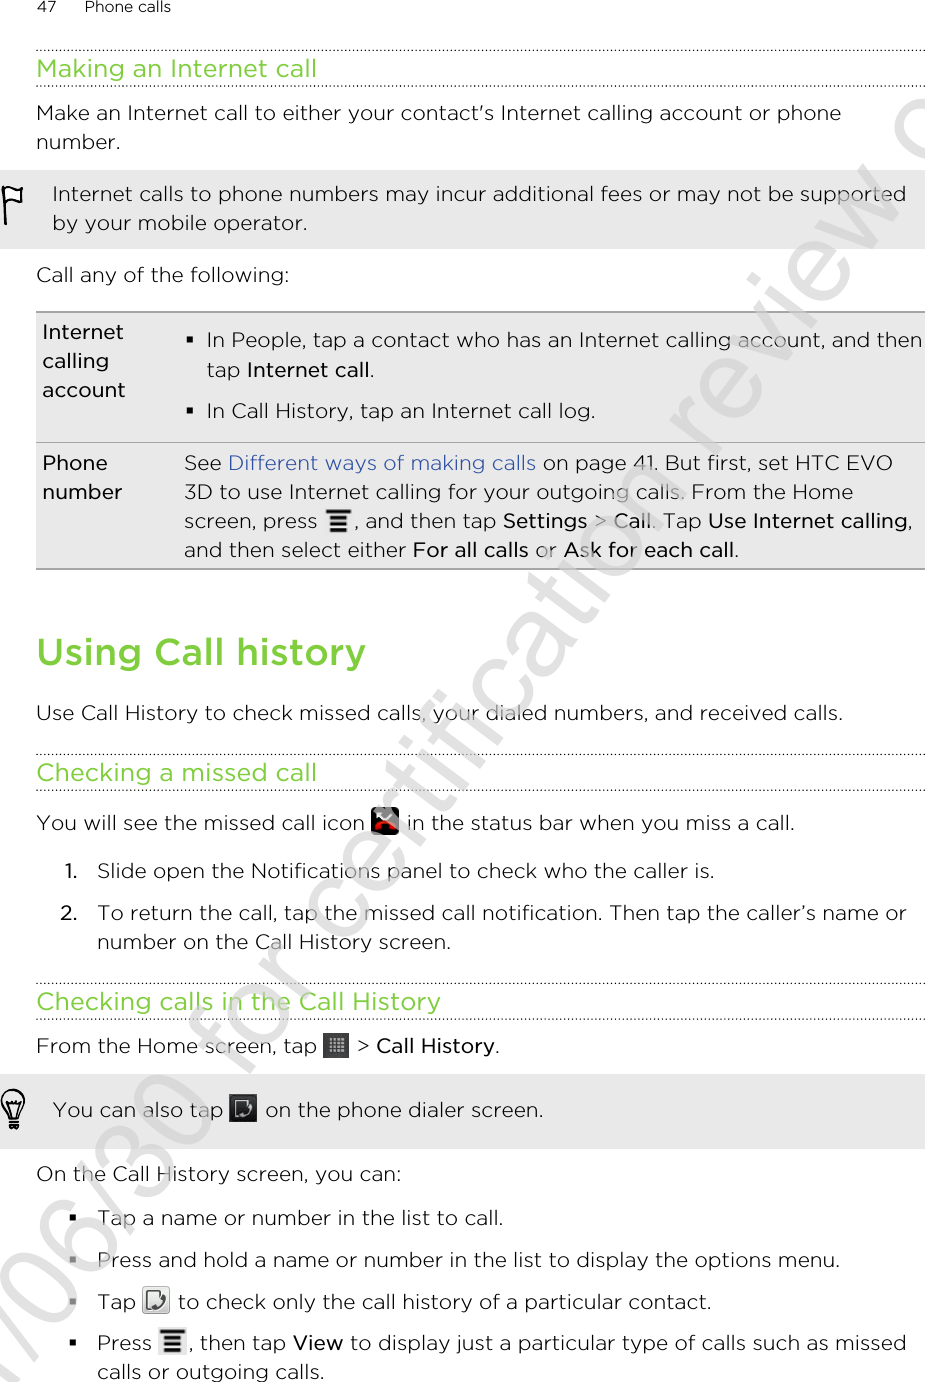 Making an Internet callMake an Internet call to either your contact&apos;s Internet calling account or phonenumber.Internet calls to phone numbers may incur additional fees or may not be supportedby your mobile operator.Call any of the following:Internetcallingaccount§In People, tap a contact who has an Internet calling account, and thentap Internet call.§In Call History, tap an Internet call log.PhonenumberSee Different ways of making calls on page 41. But first, set HTC EVO3D to use Internet calling for your outgoing calls. From the Homescreen, press  , and then tap Settings &gt; Call. Tap Use Internet calling,and then select either For all calls or Ask for each call.Using Call historyUse Call History to check missed calls, your dialed numbers, and received calls.Checking a missed callYou will see the missed call icon   in the status bar when you miss a call.1. Slide open the Notifications panel to check who the caller is.2. To return the call, tap the missed call notification. Then tap the caller’s name ornumber on the Call History screen.Checking calls in the Call HistoryFrom the Home screen, tap   &gt; Call History. You can also tap   on the phone dialer screen.On the Call History screen, you can:§Tap a name or number in the list to call.§Press and hold a name or number in the list to display the options menu.§Tap   to check only the call history of a particular contact.§Press  , then tap View to display just a particular type of calls such as missedcalls or outgoing calls.47 Phone calls2011/06/30 for certification review only